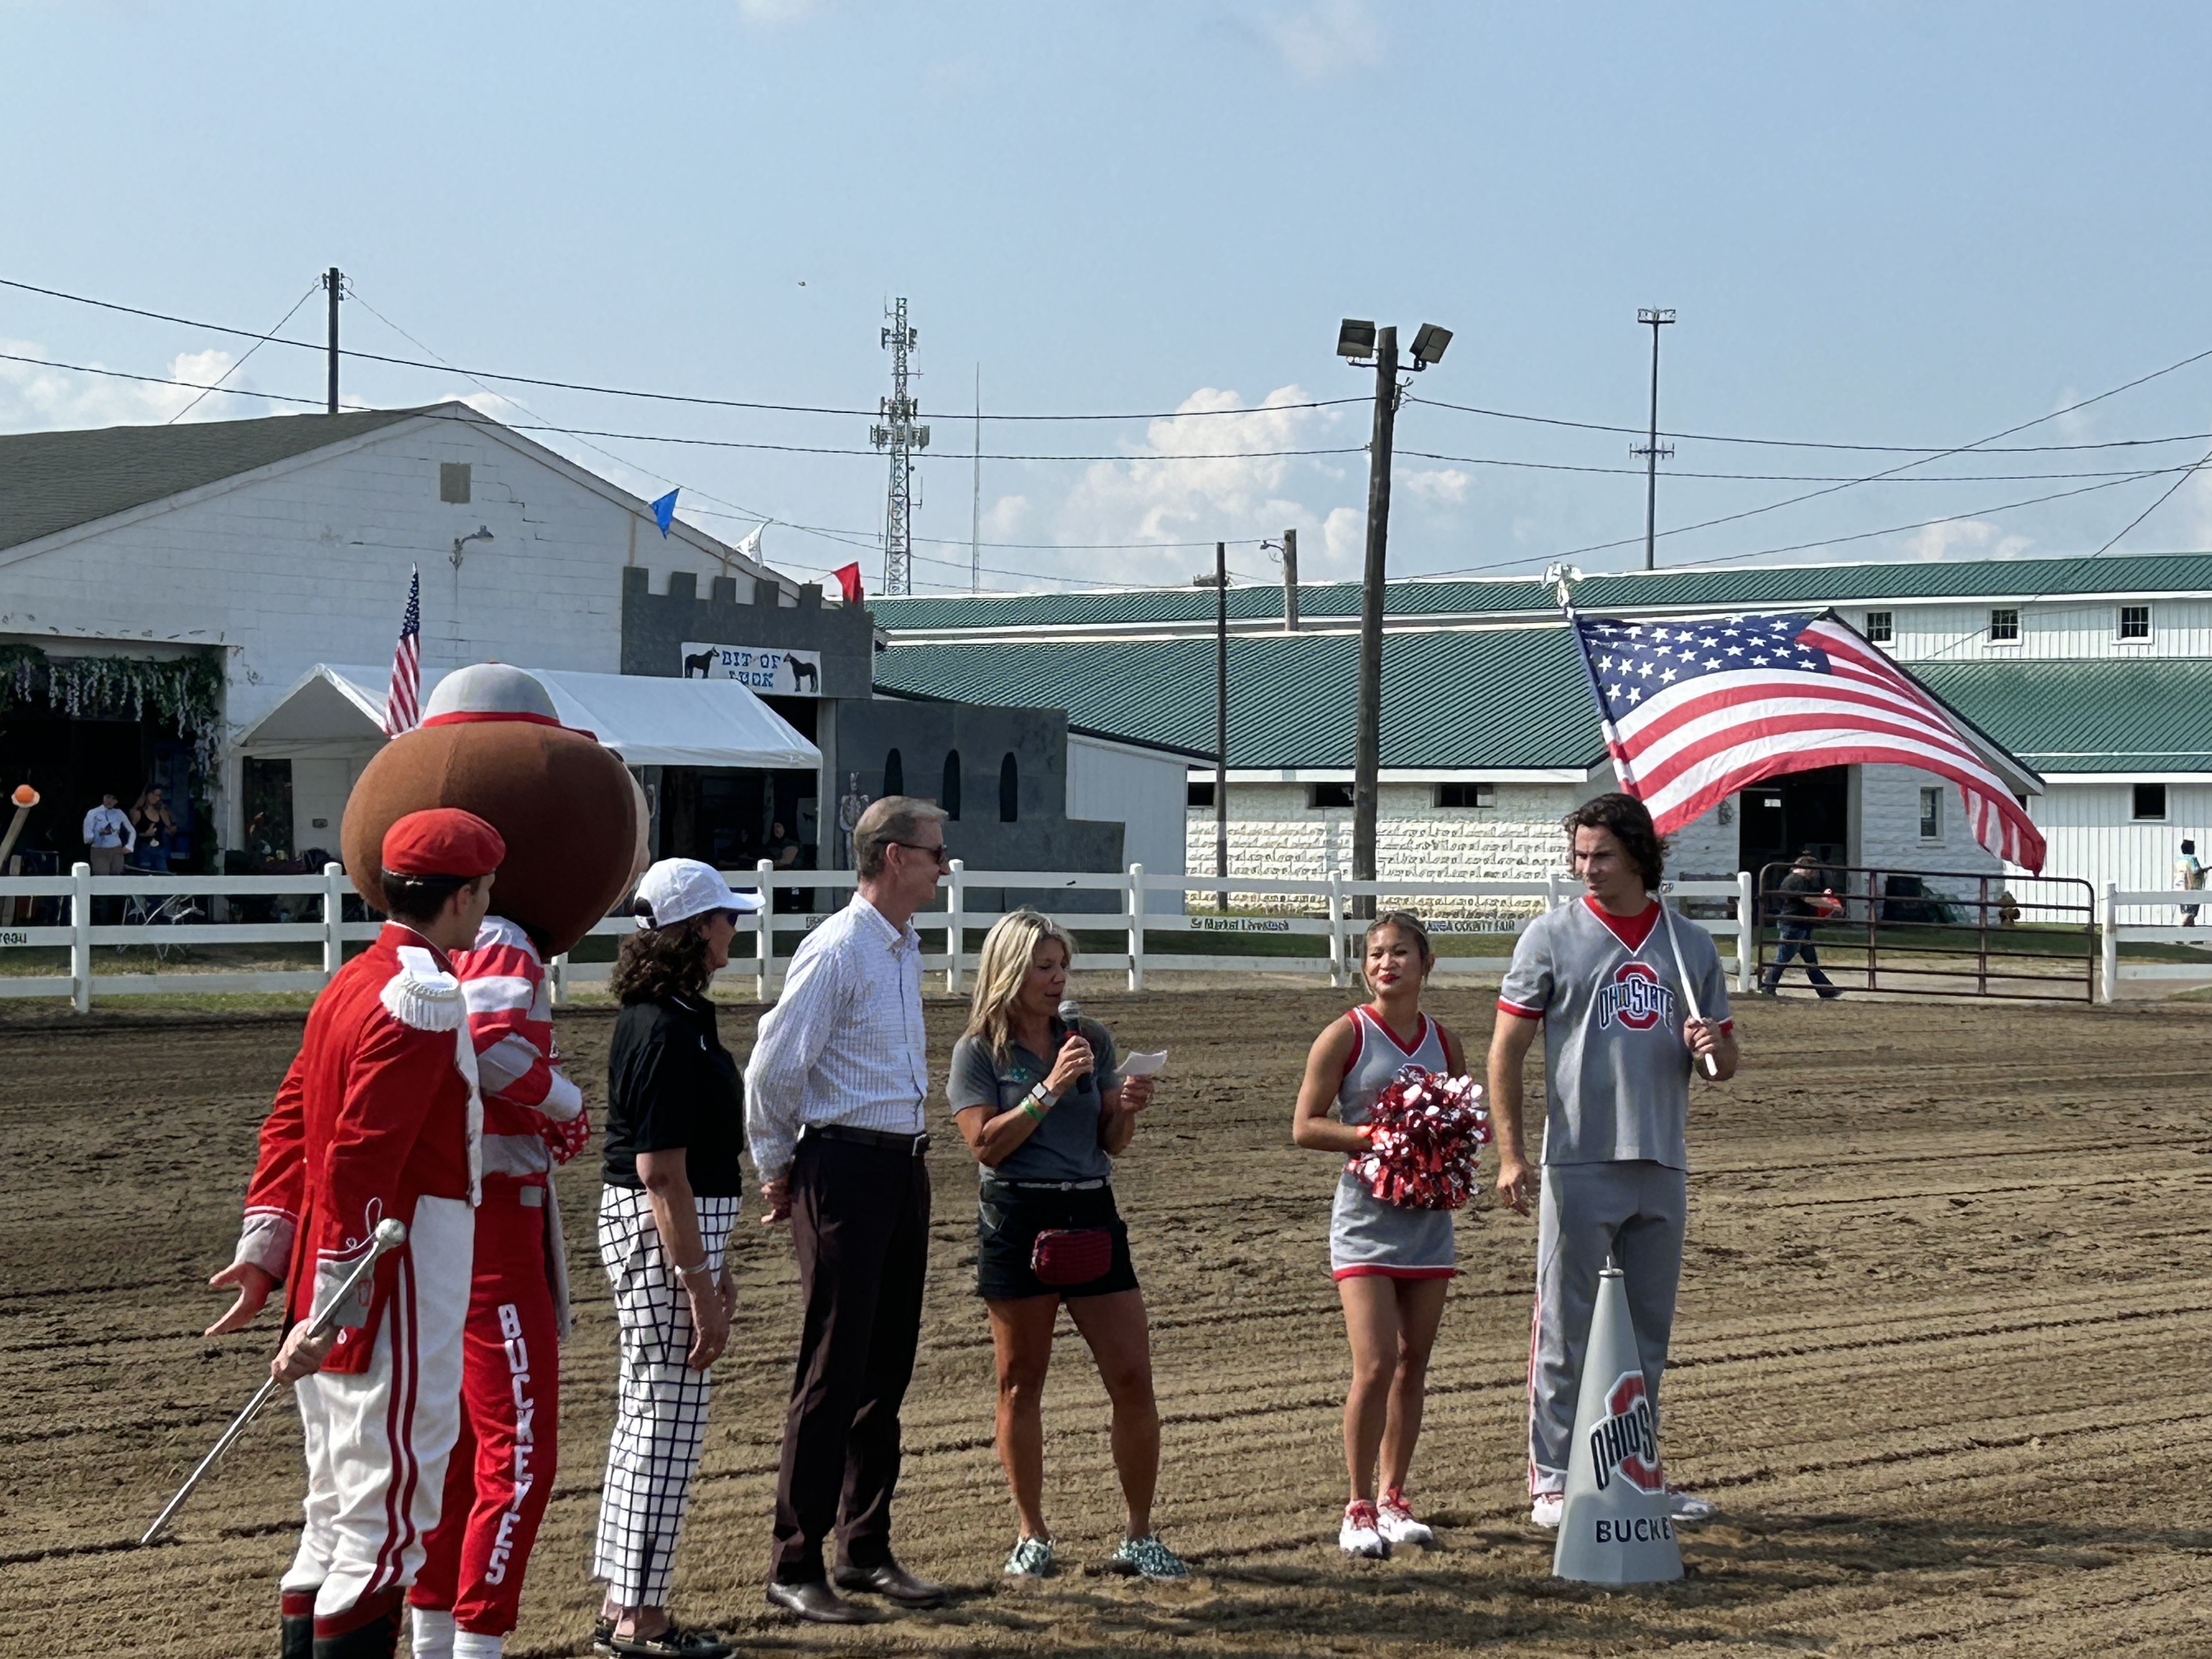 The Lake County Fair welcomed The Ohio State University President Ted Carter.